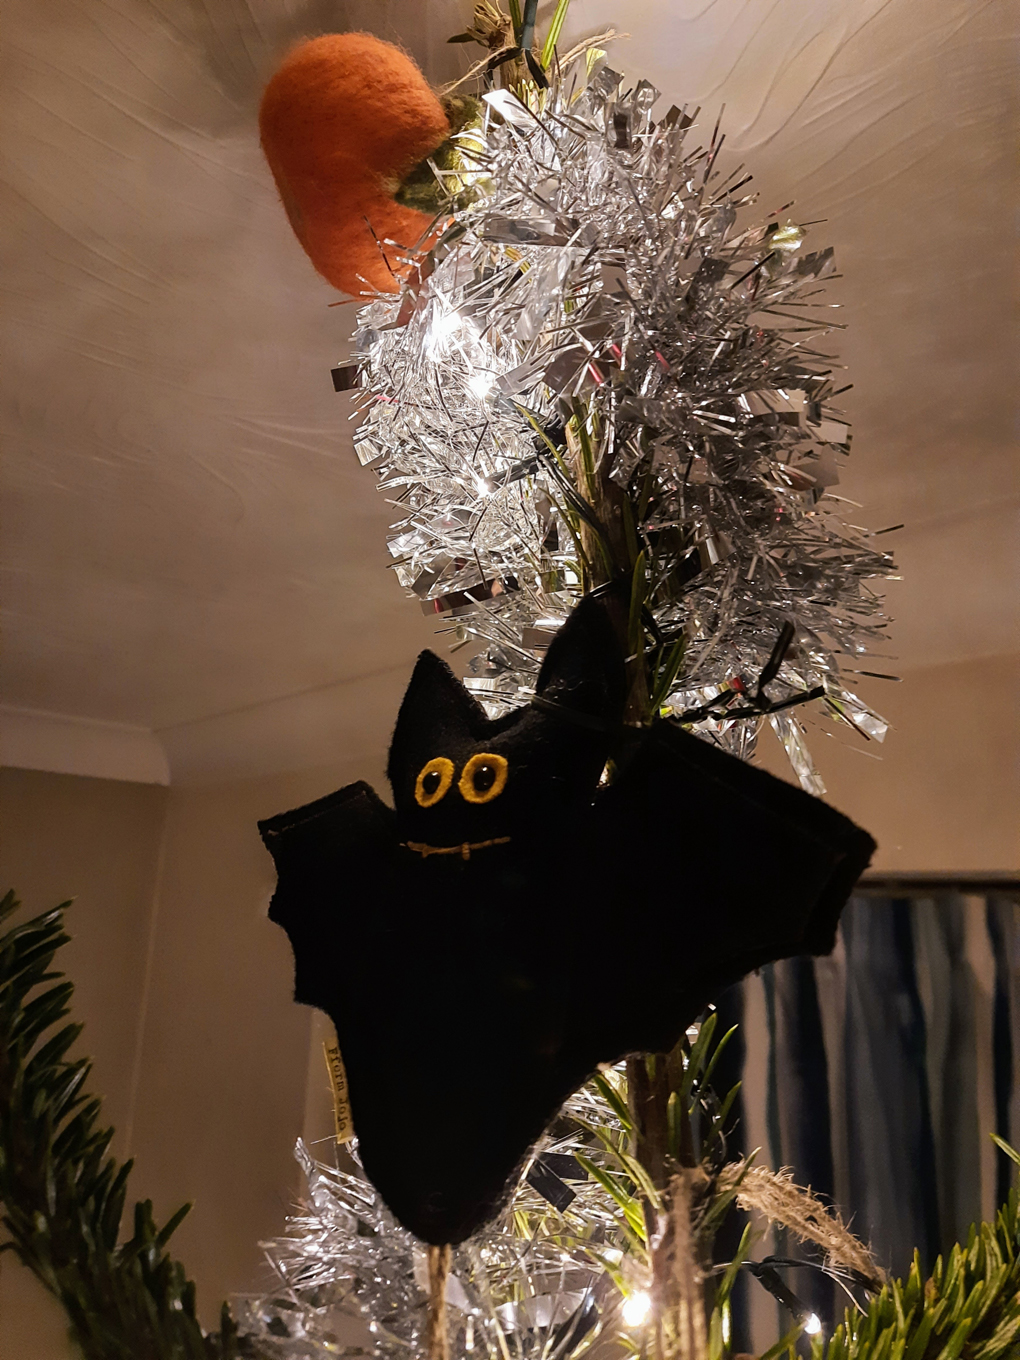 A felt bat with large eyes and a big smile nestled at the top of a Christmas tree surrounded by silver tinsel and lights